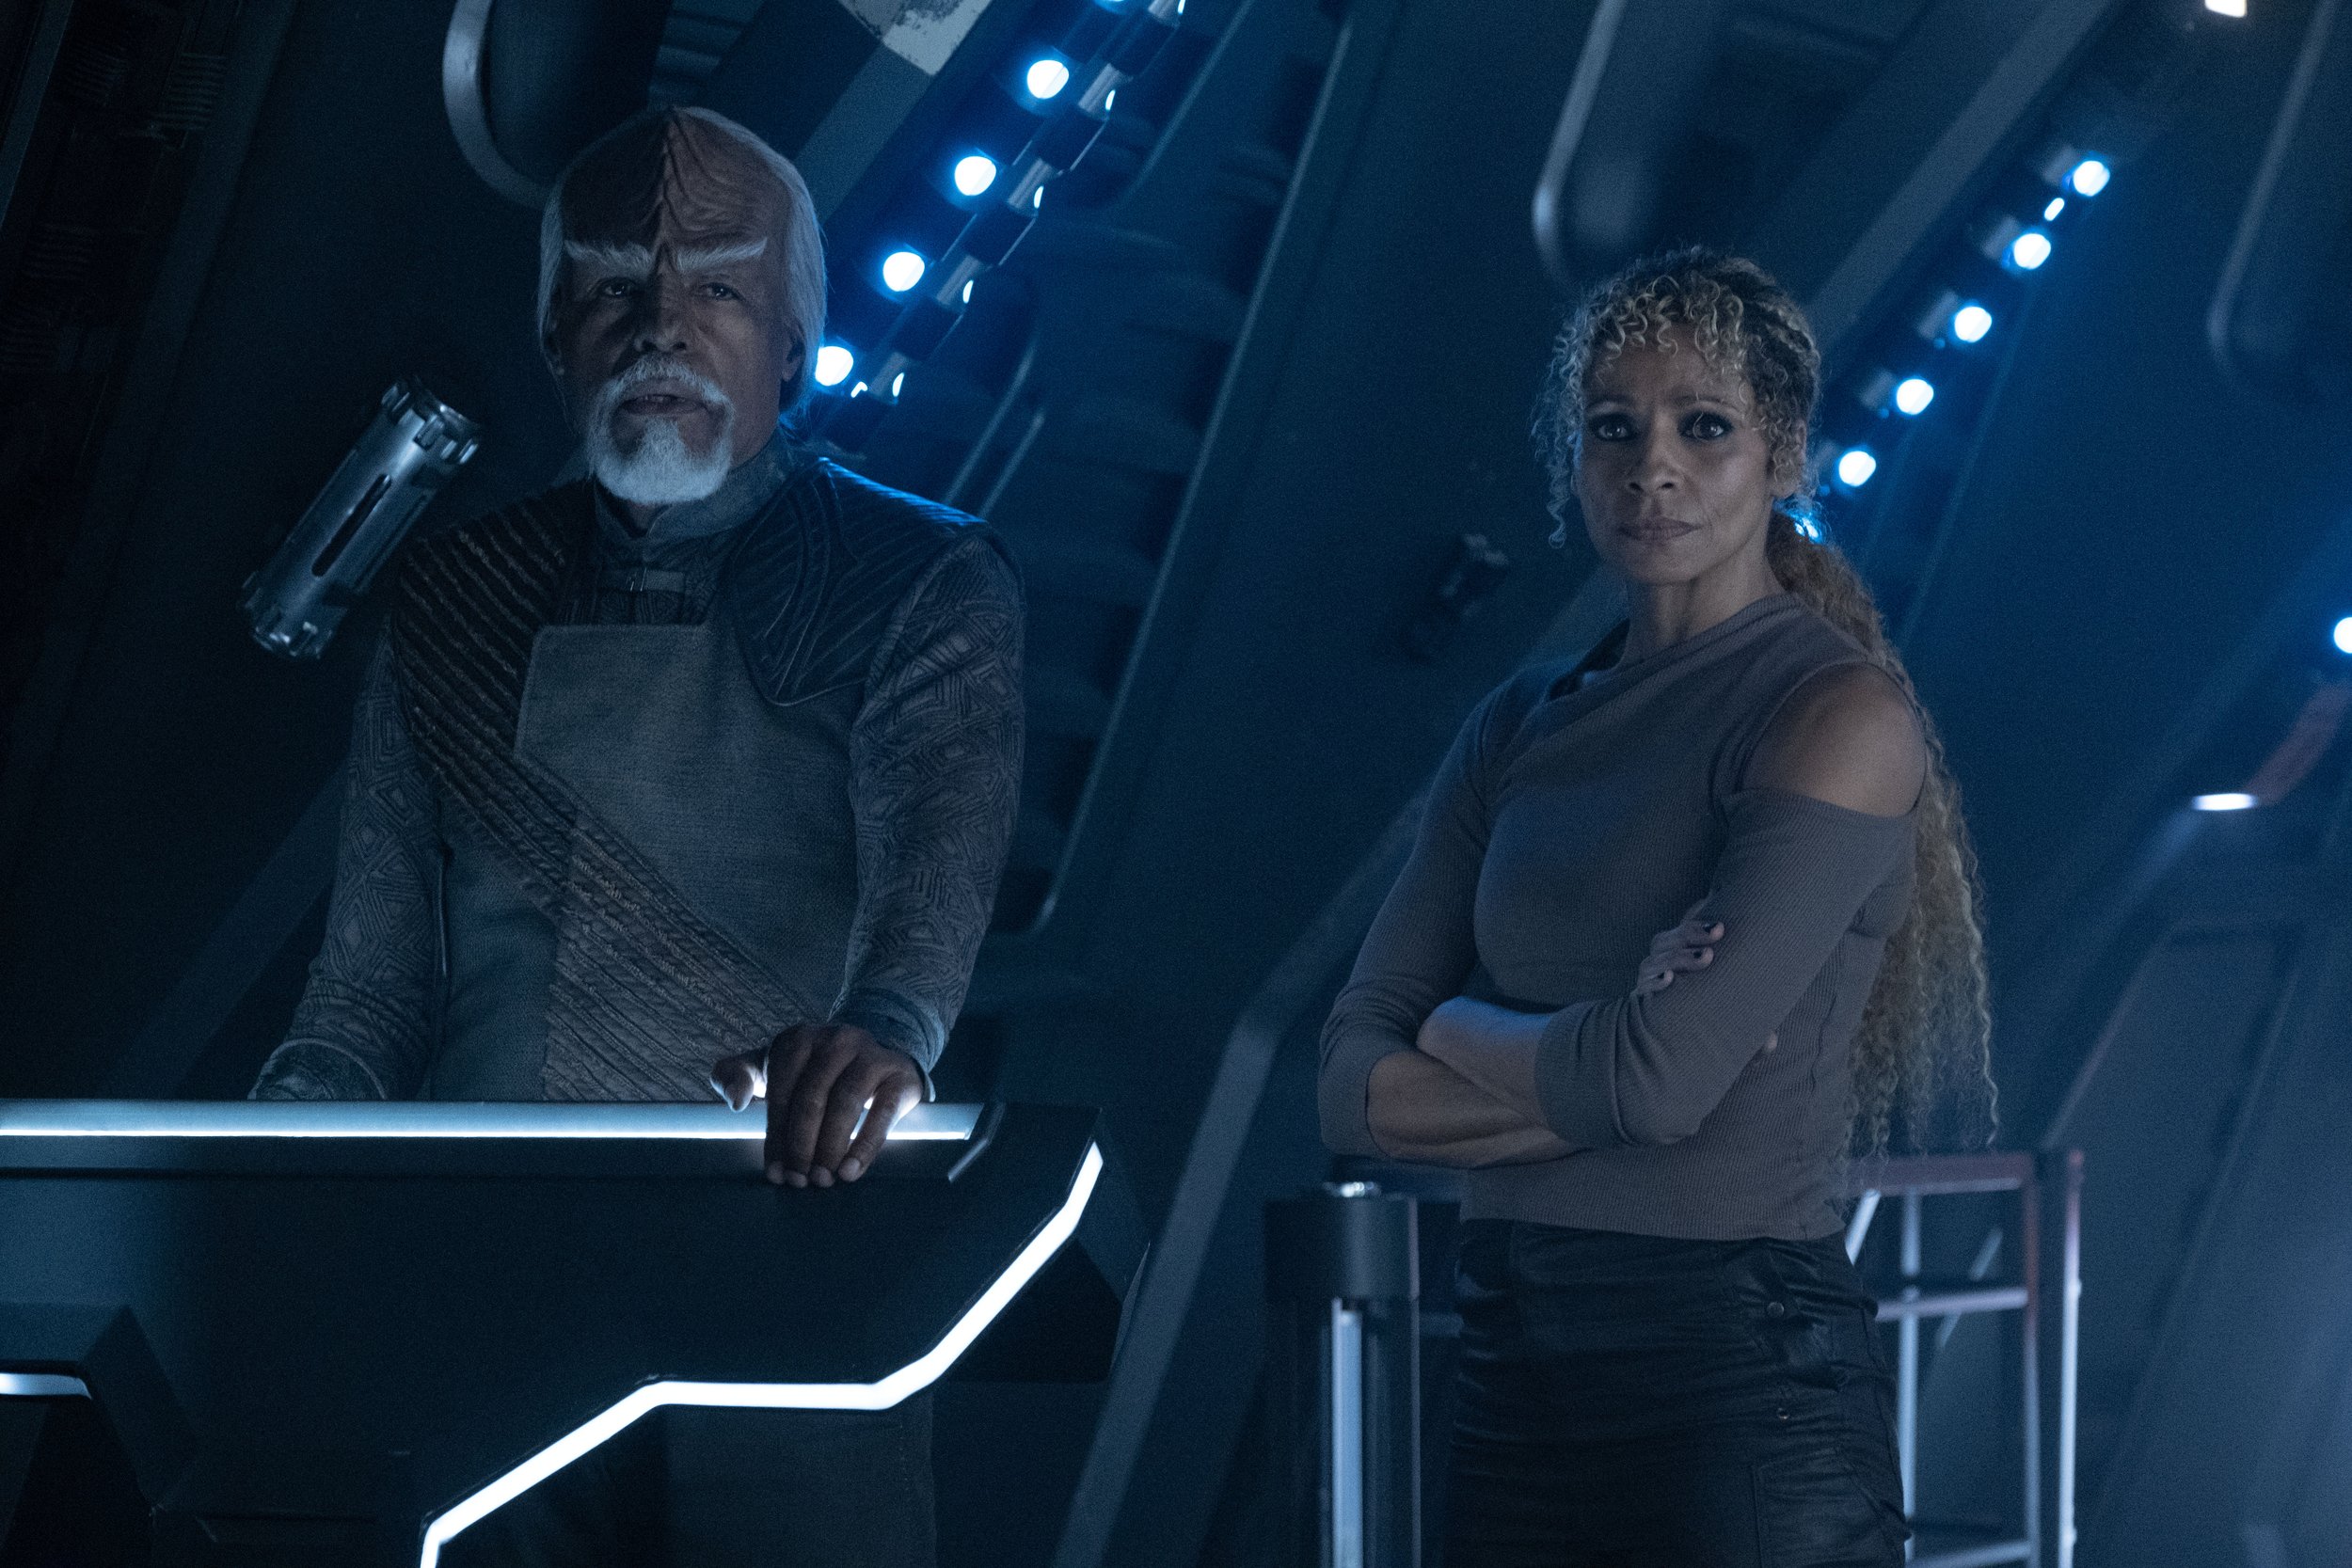   Michael Dorn  as Worf and  Michelle Hurd  as Raffi Musiker.  Photo Credit: Trae Patton/ Paramount+.  